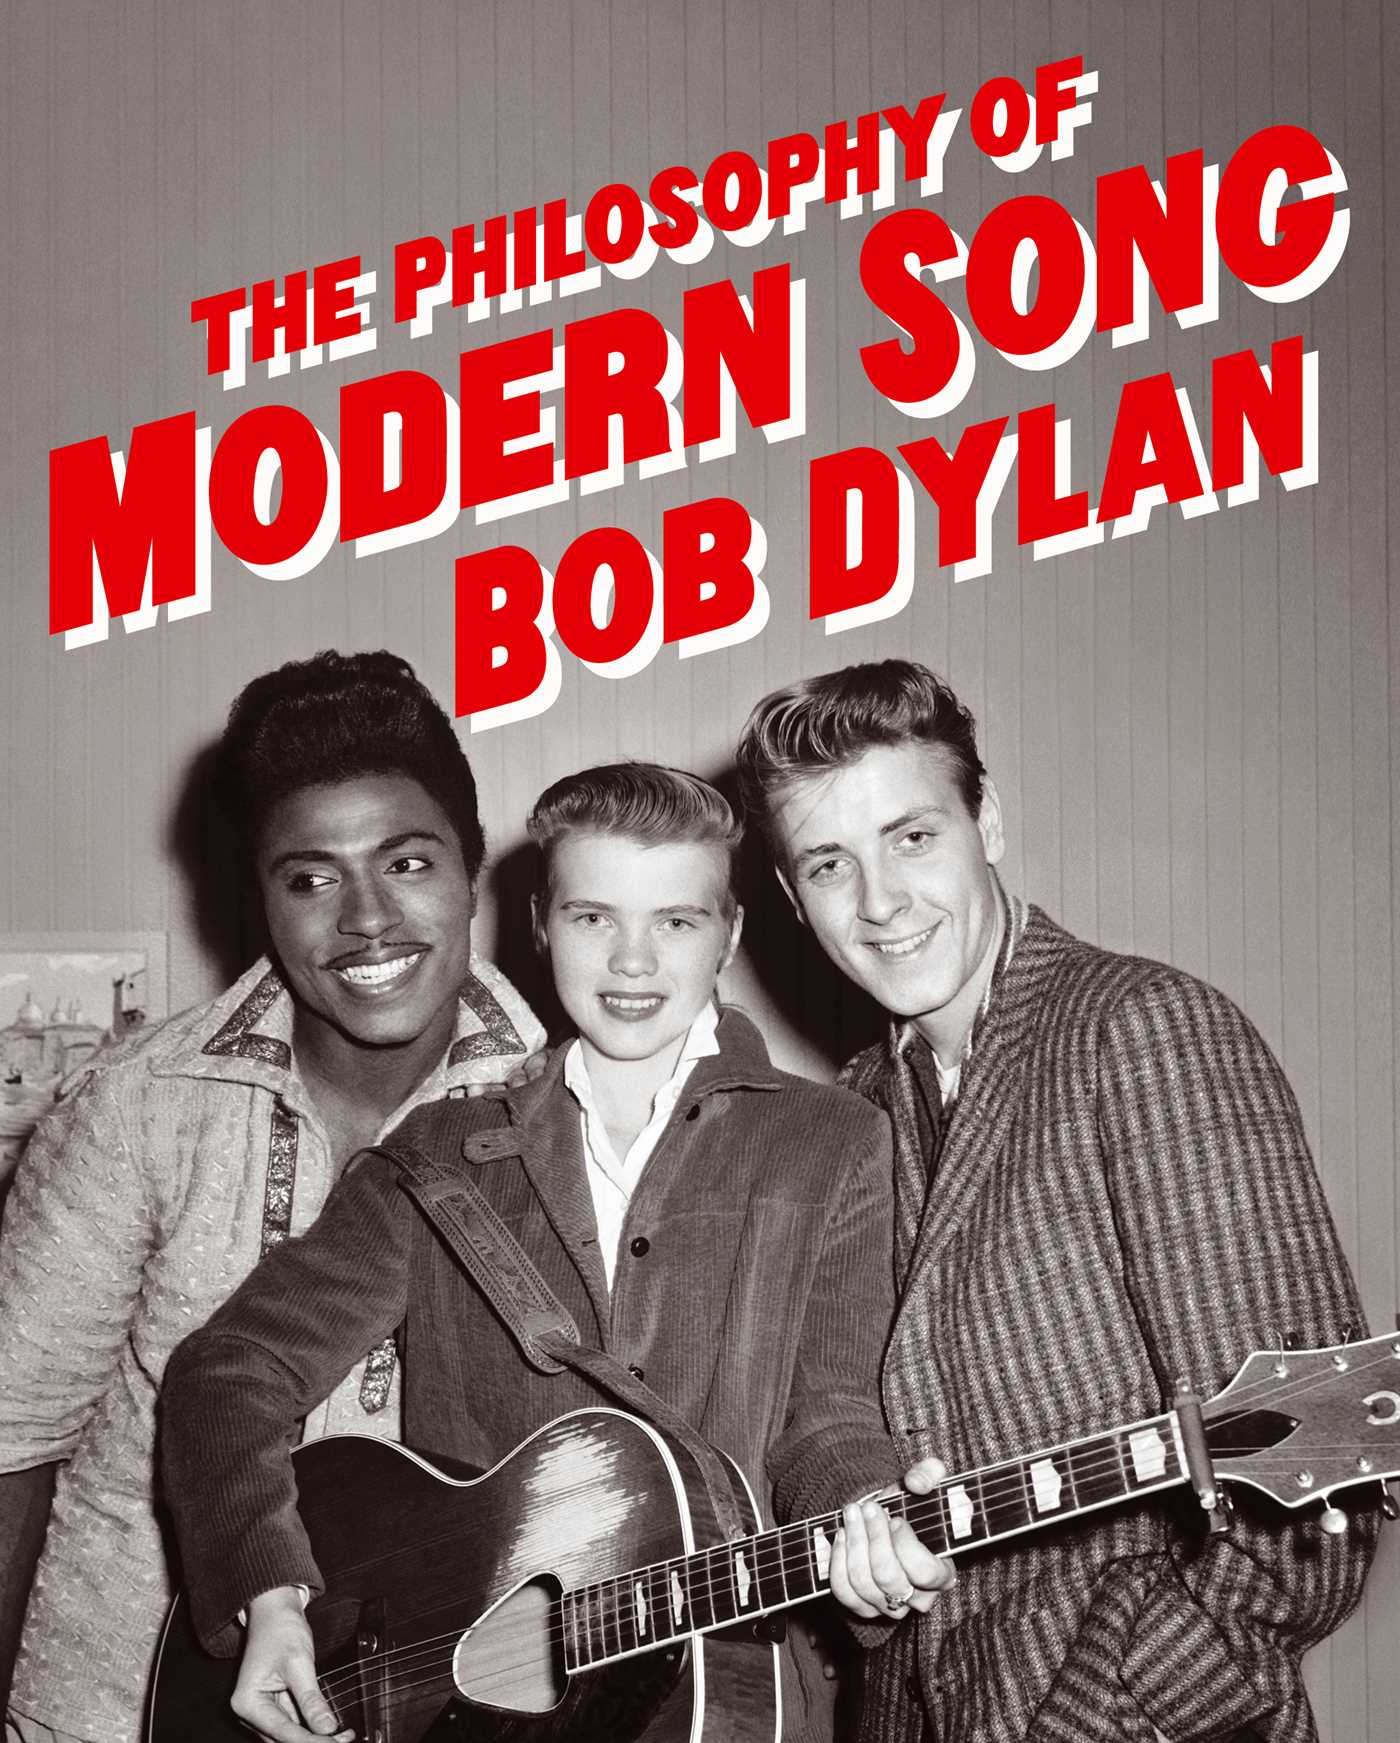 The Philosophy of Modern Song | Dylan, Bob